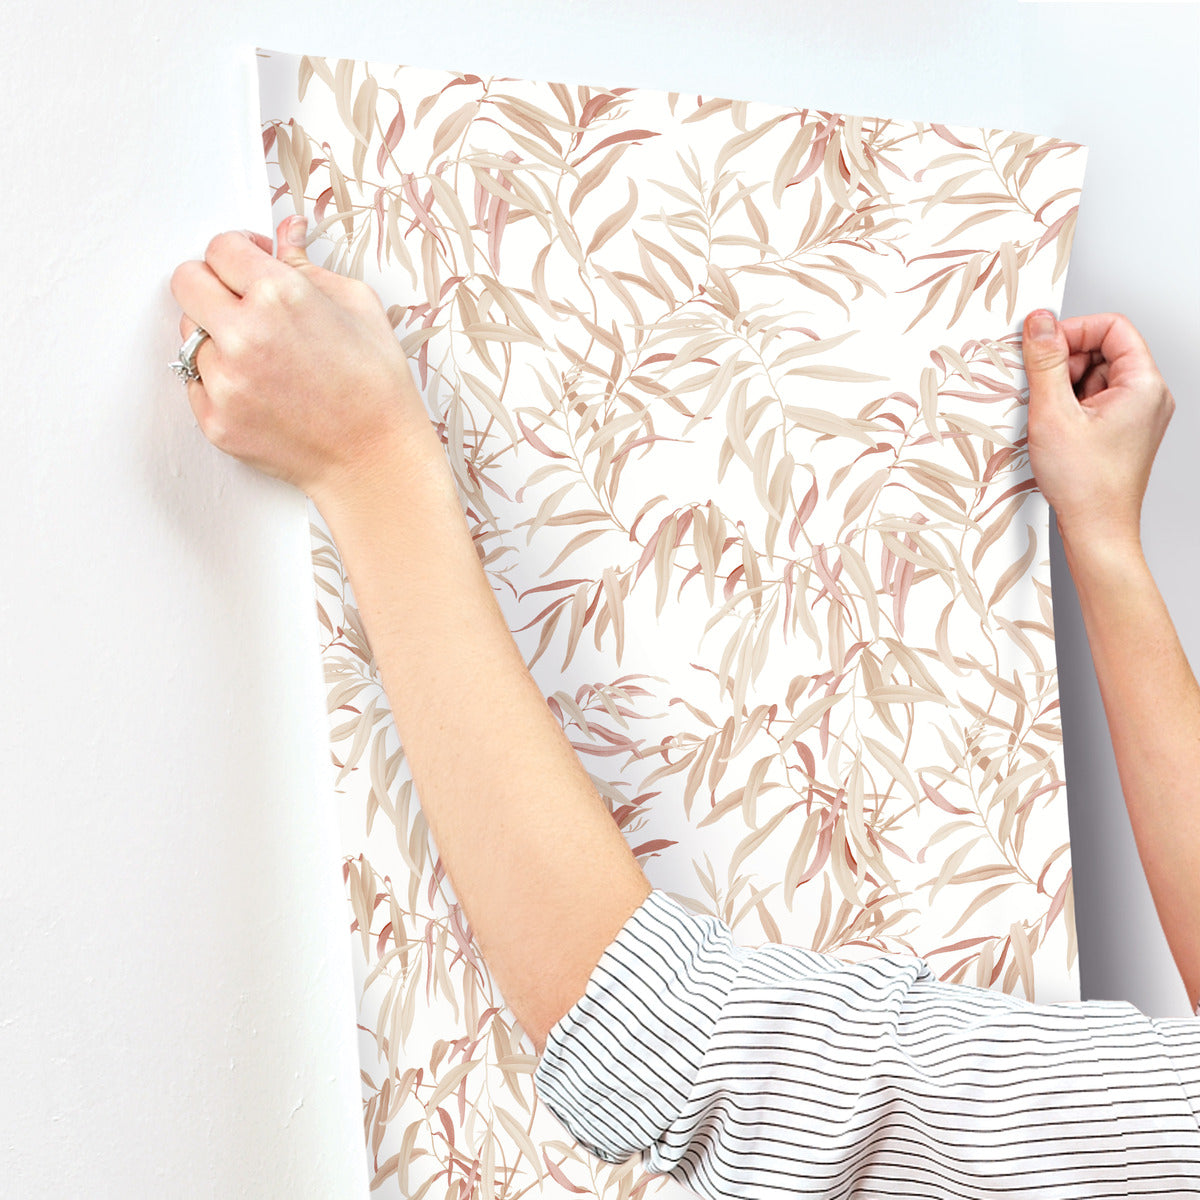 A person wearing a striped shirt is applying York Wallcoverings Willow Grove Clay Wallpaper Pink (60 Sq.Ft.) with a leafy, pastel-colored botanical design to a white wall. The SureStrip wallpaper features an elegant pattern of light pink and beige leaves, creating a serene botanical retreat.